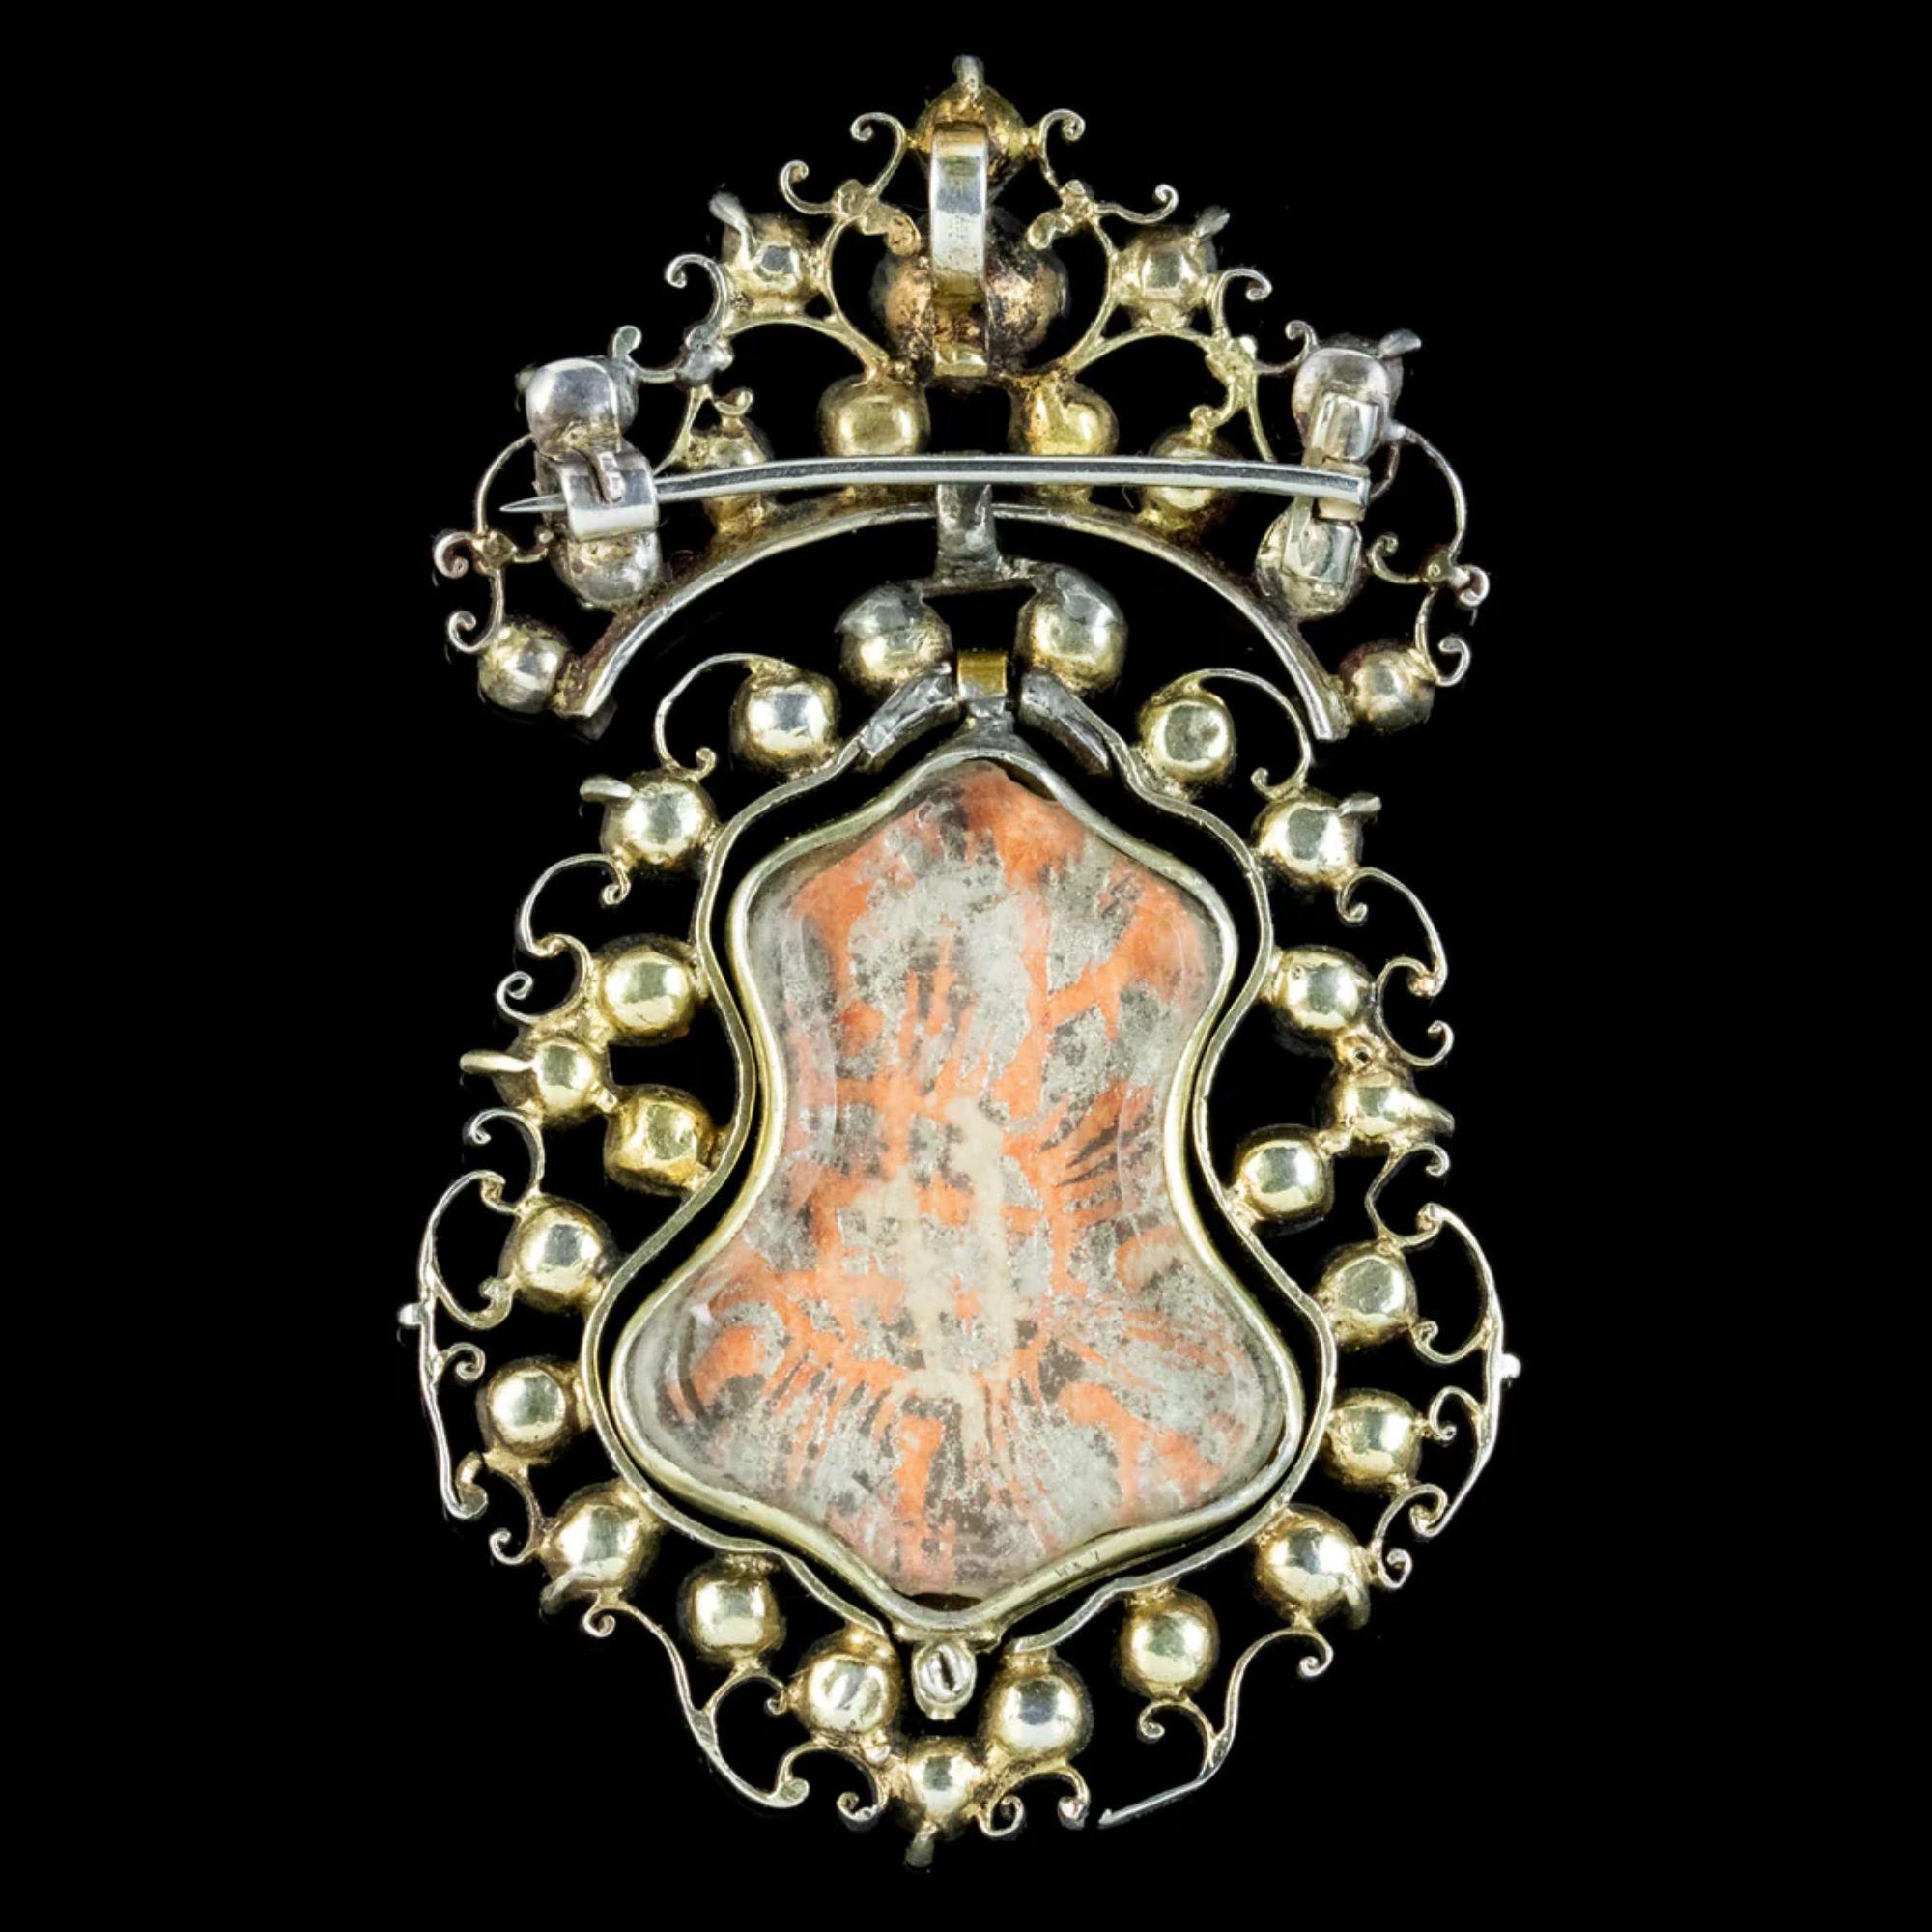 A rare Antique Queen Anne pendant/ brooch from the early 1700s decorated with an array of colourful old cut Paste stones dotted across an open worked Silver gallery with scrolling foliate metalwork.

A double-sided locket is held in the centre with